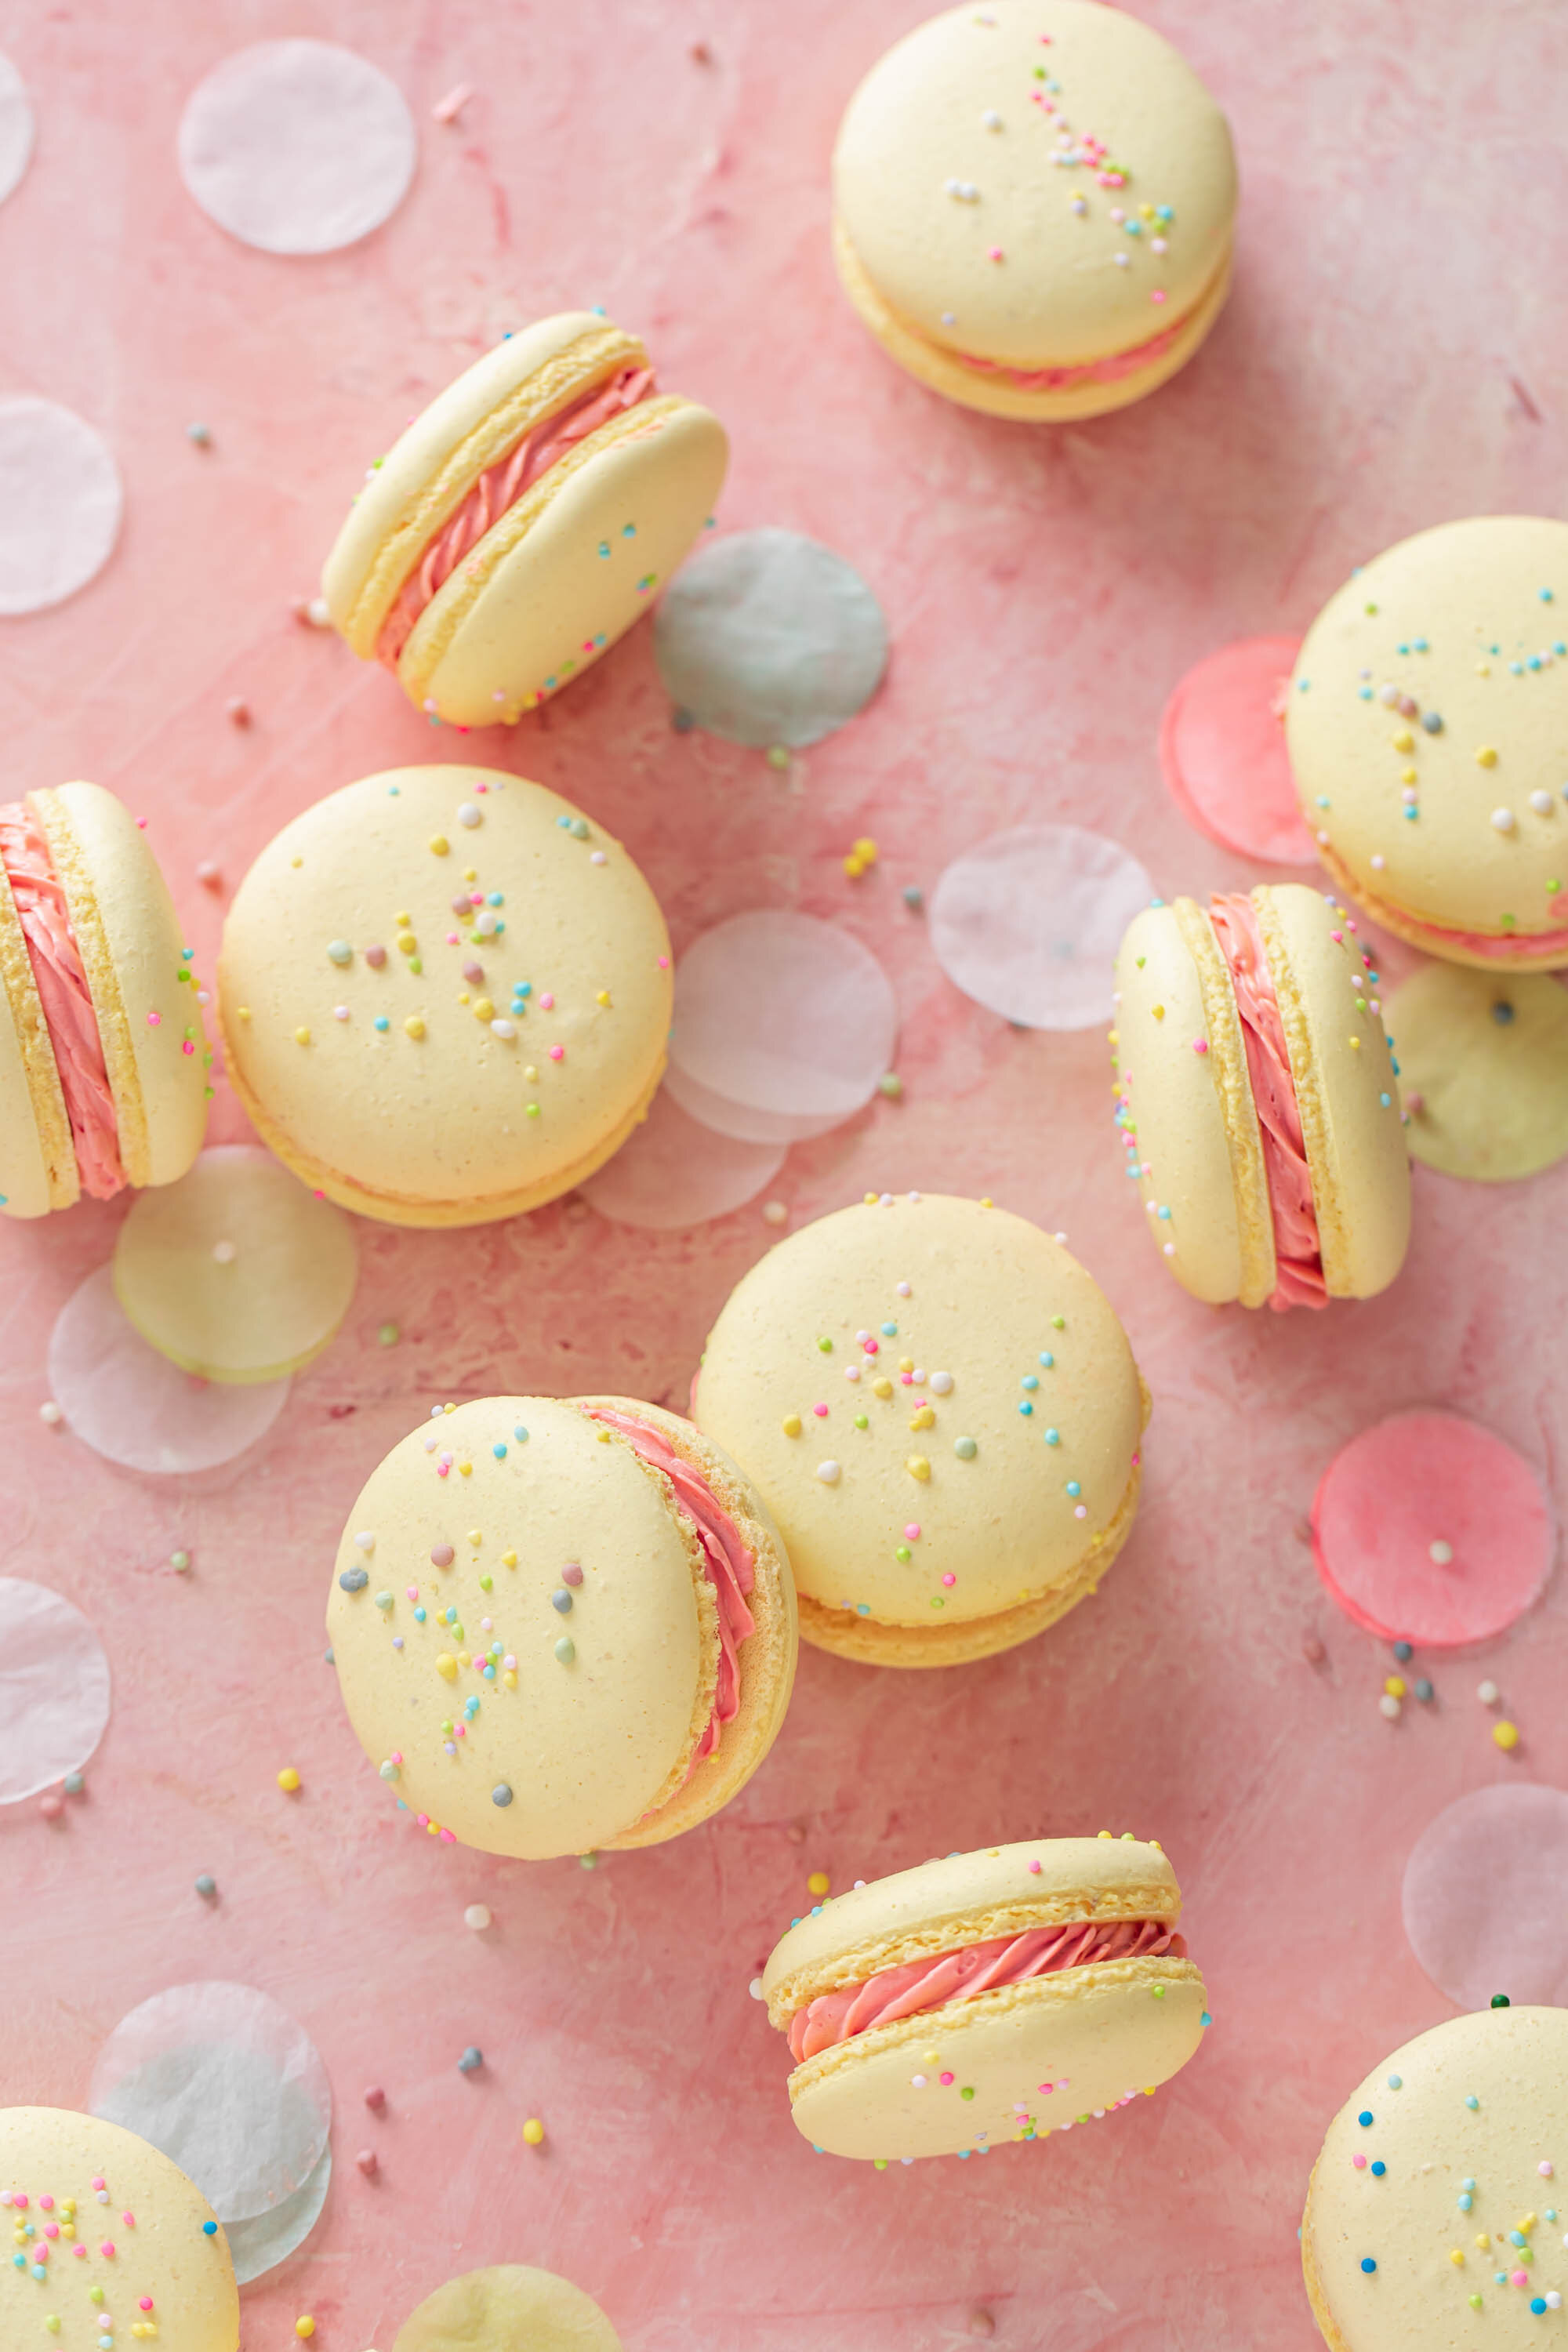 French macarons with sprinkle and pink buttercream filling scattered on a pink table with confetti.